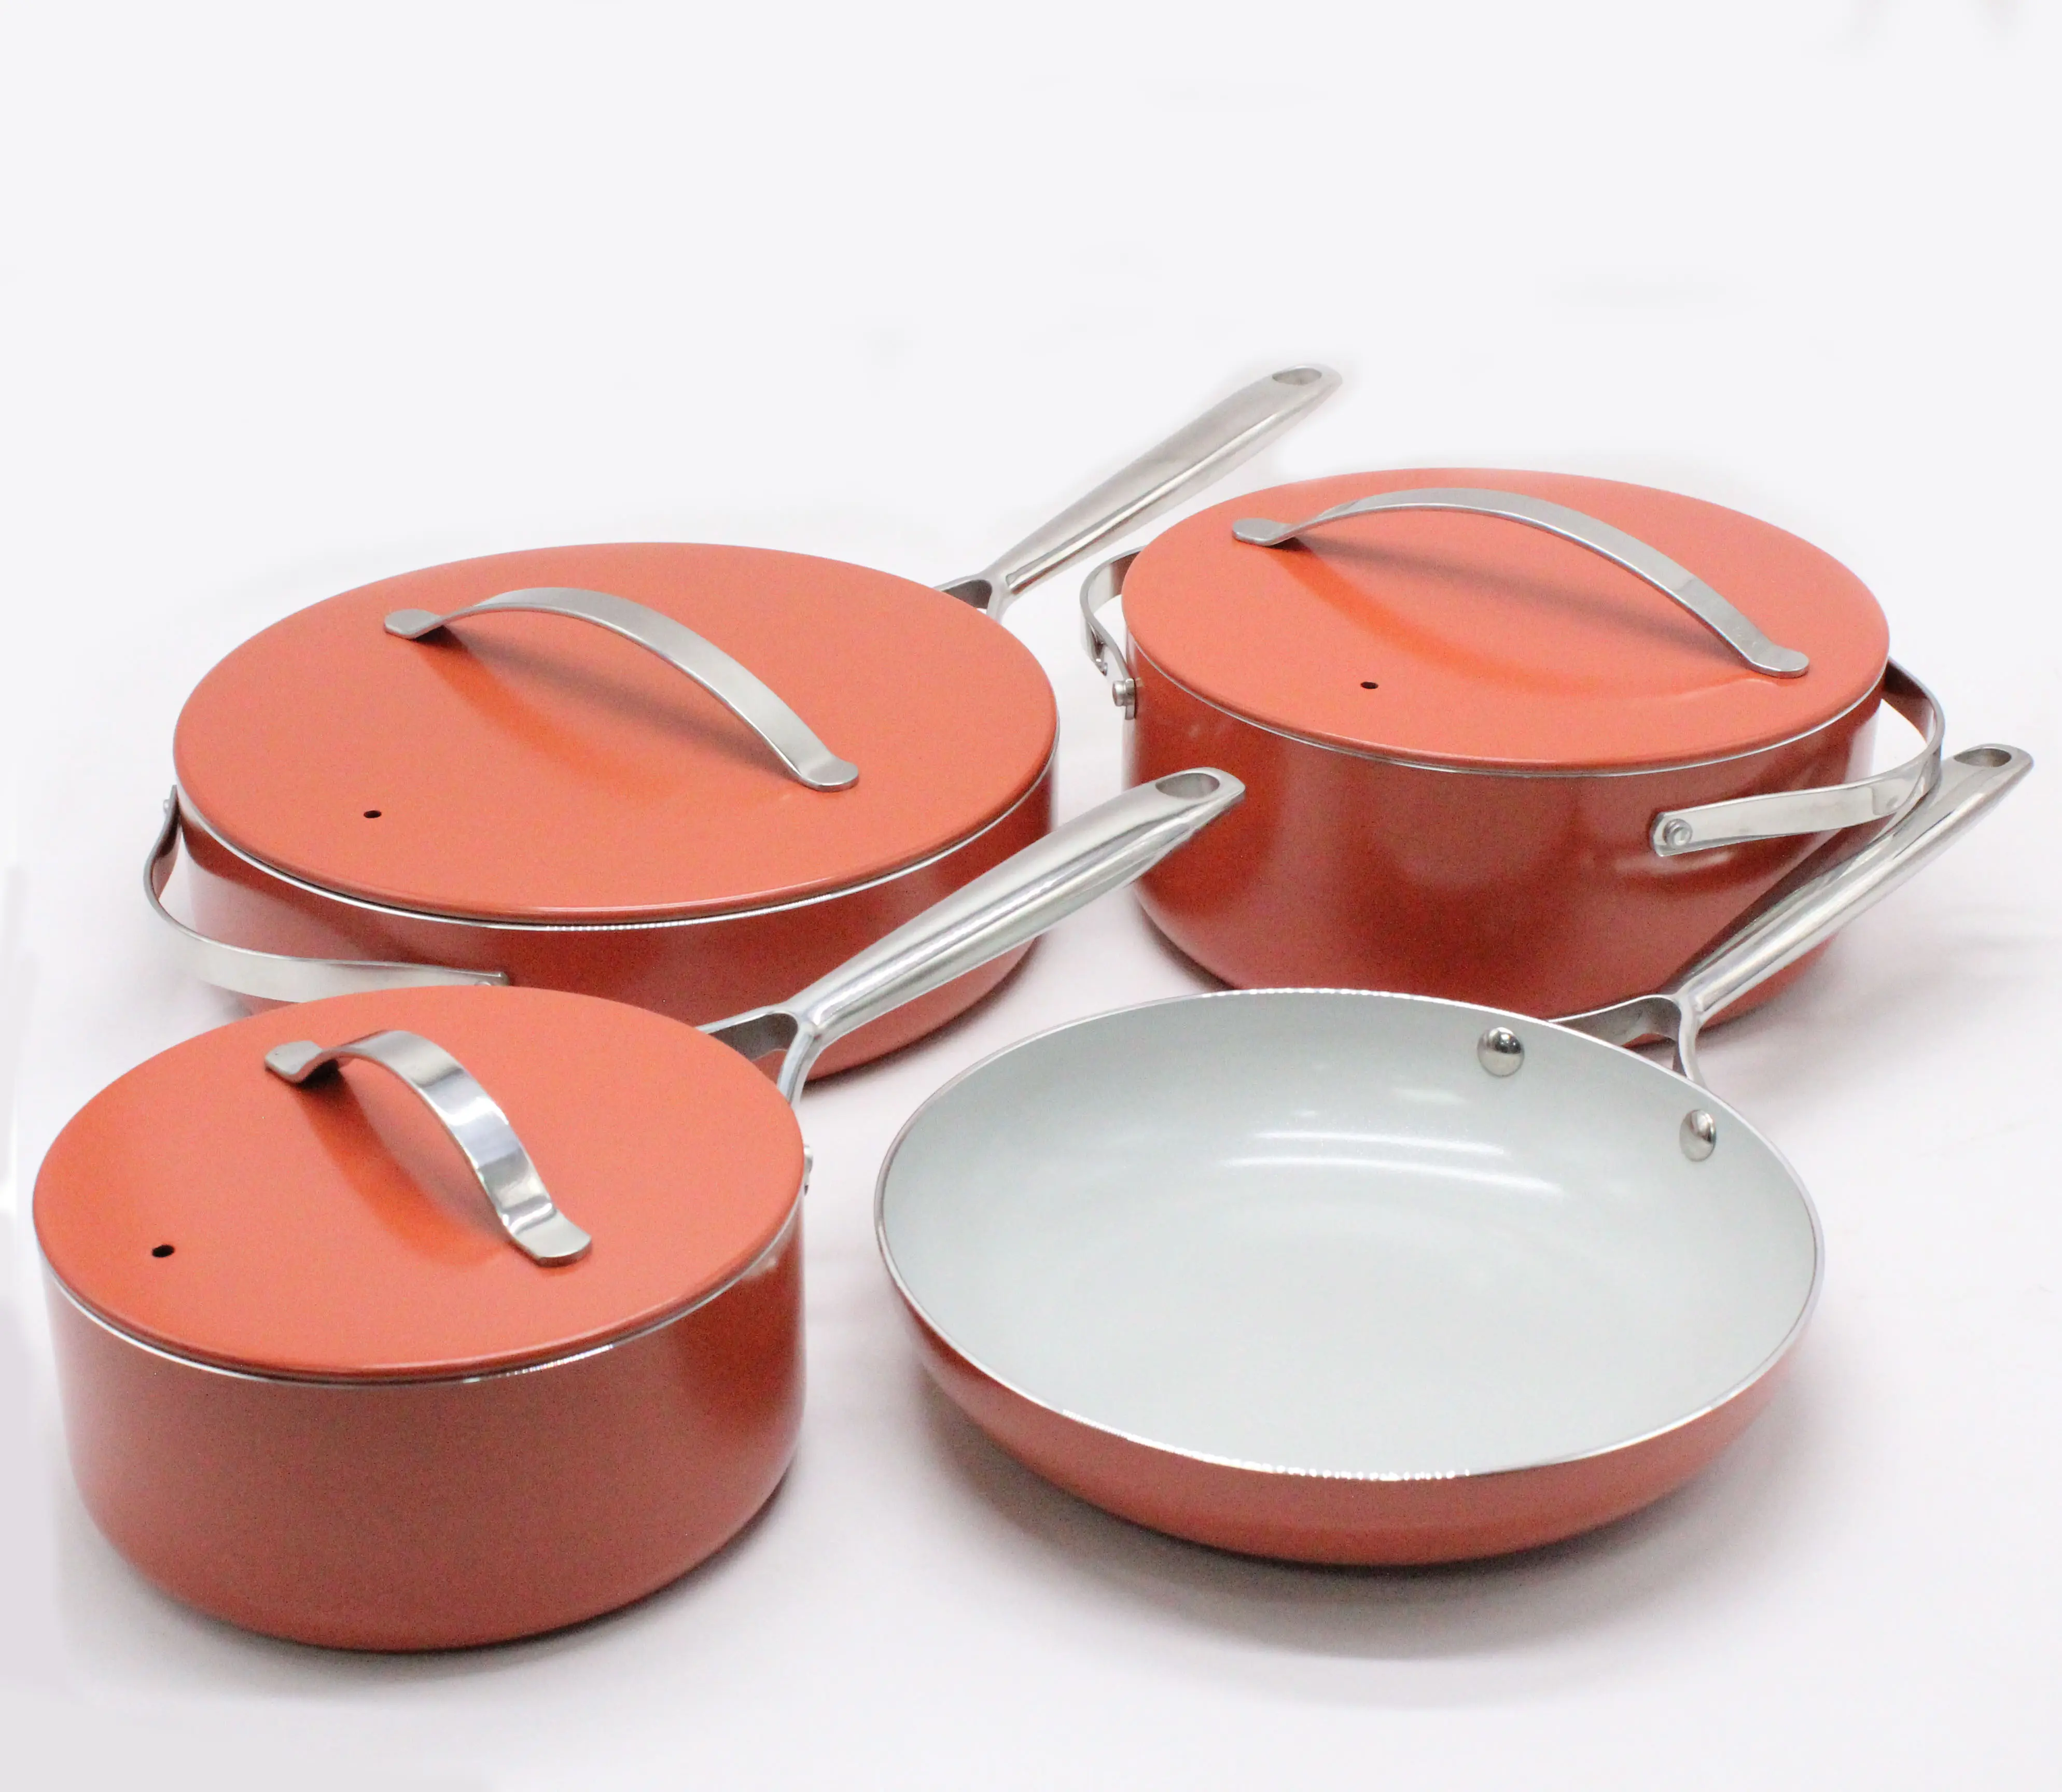 Hot Selling 4pcs Ceramic Coating Nonstick Aluminum Fry Pan& Sauce Pot Cookware sets Kitchenware sets With S/S Handle New Arrival